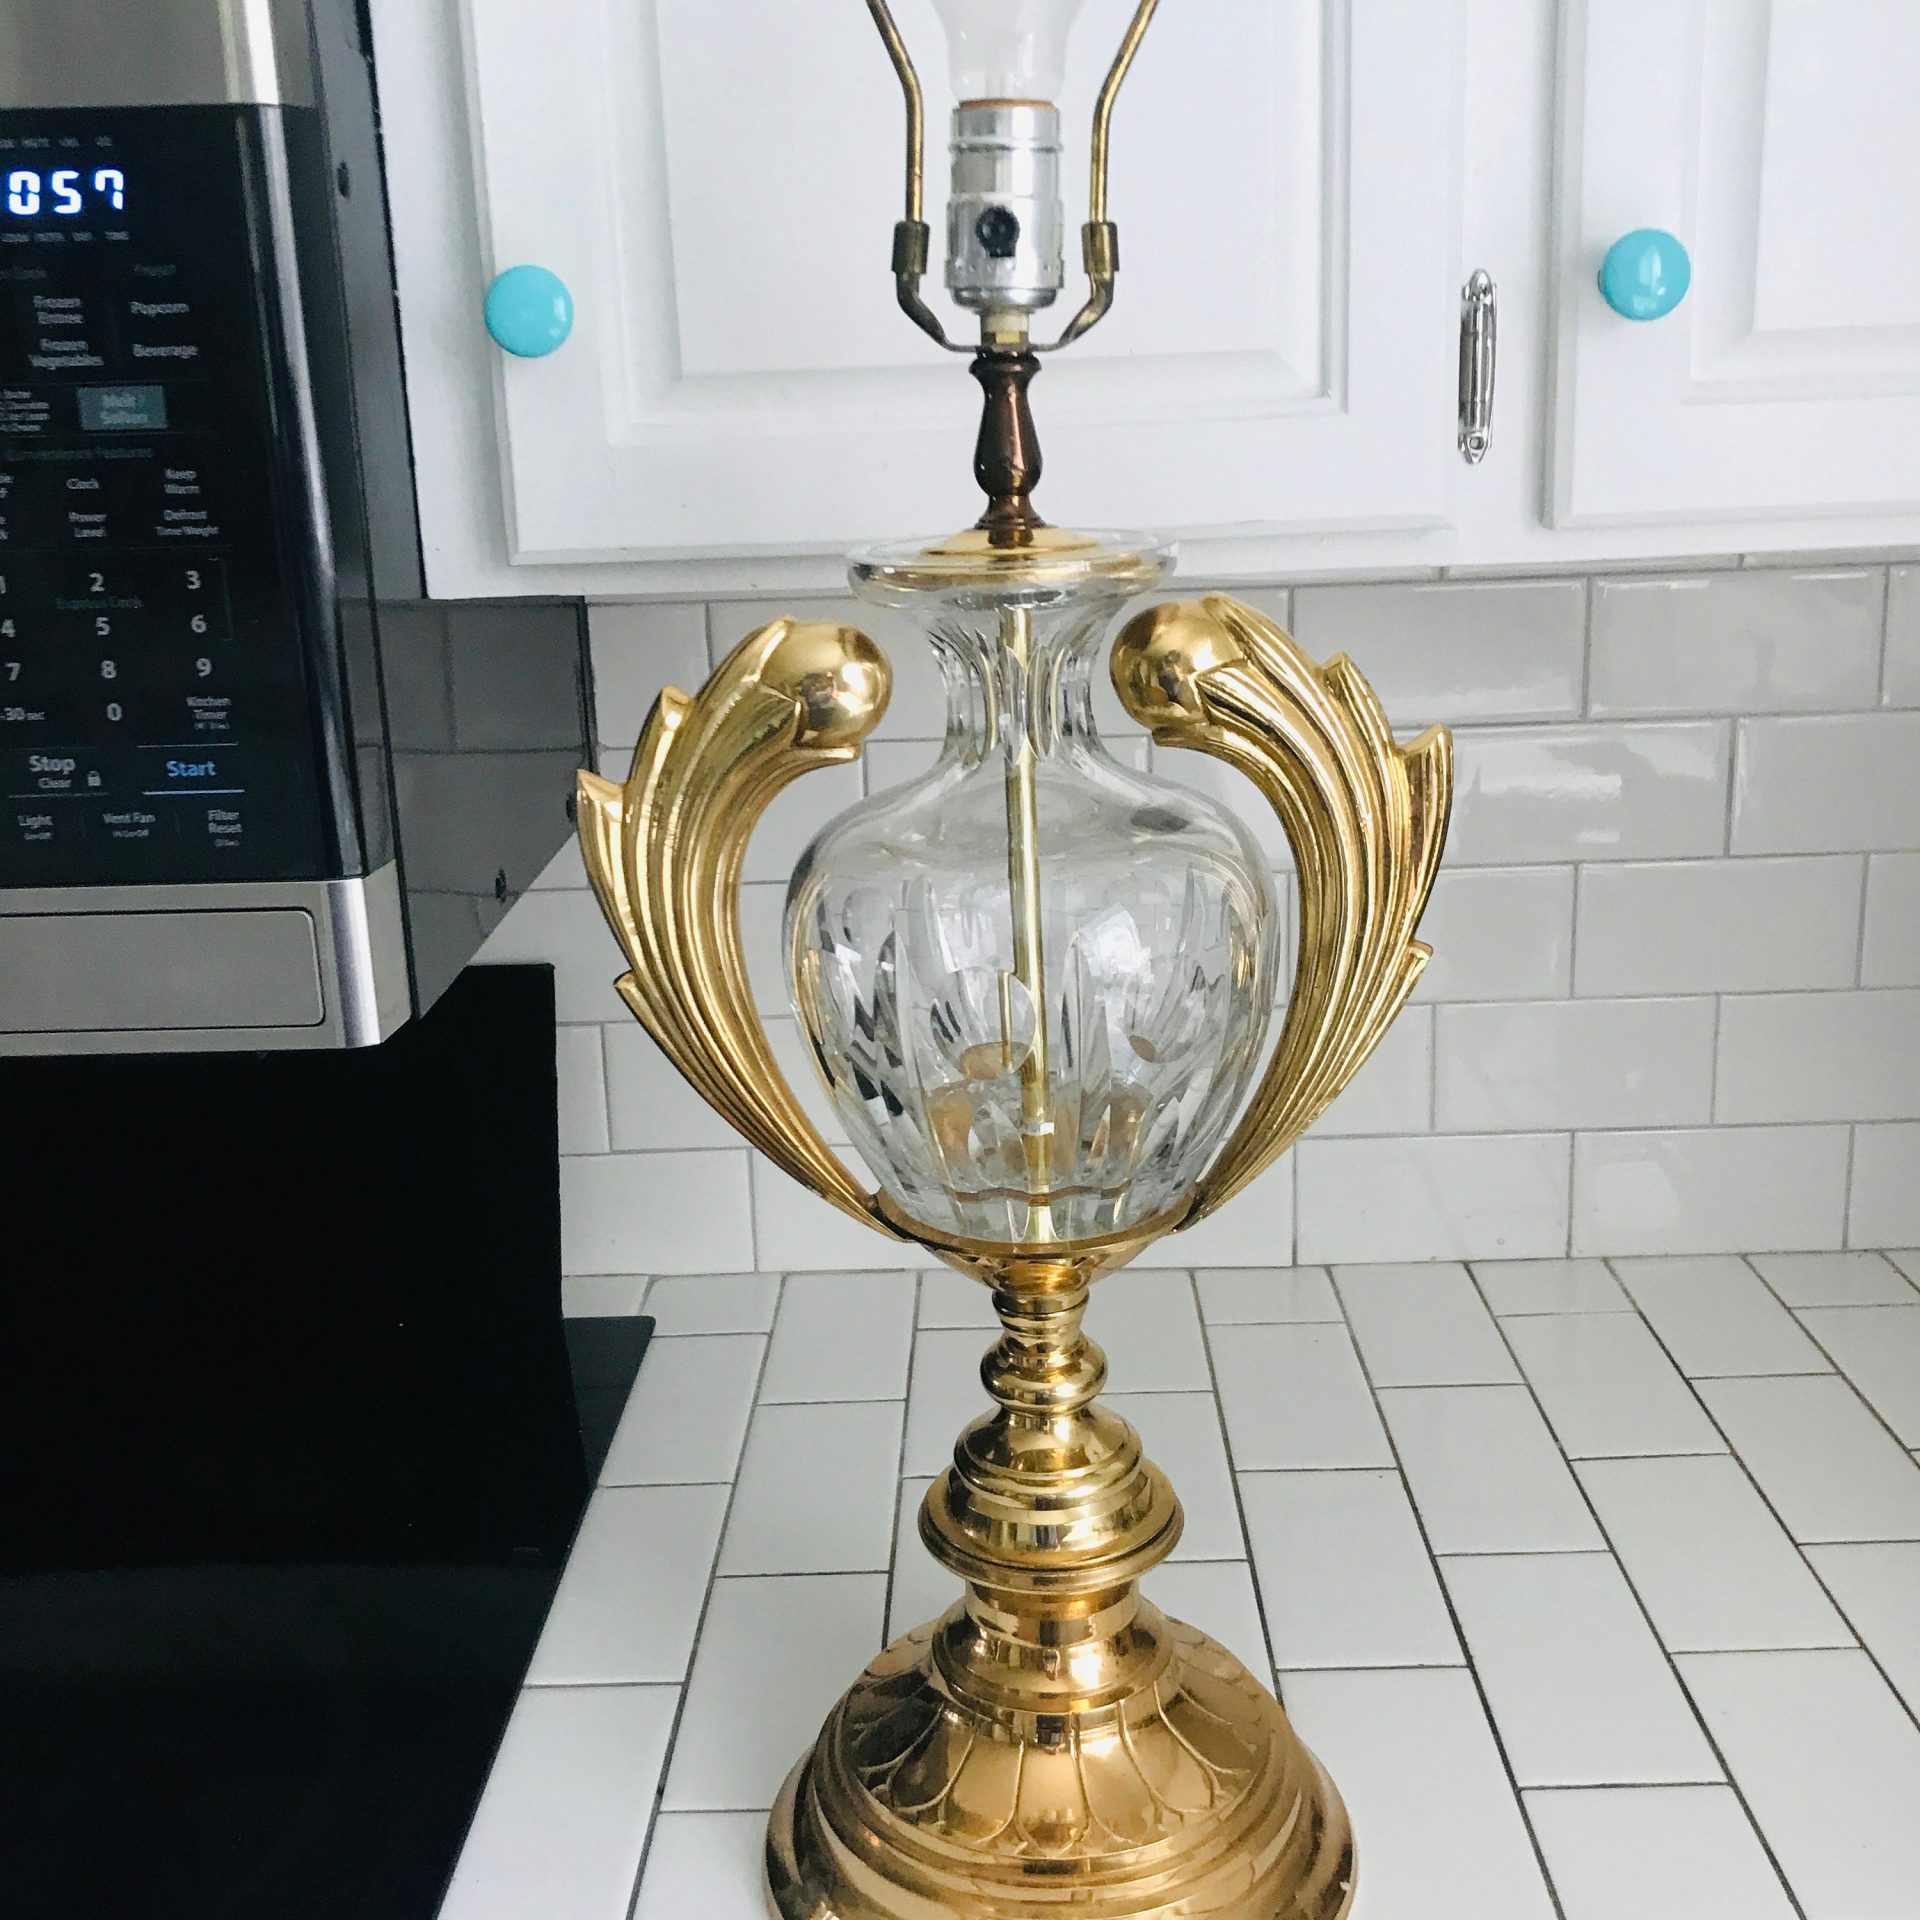 Beautiful Art Nouveau Crystal Lamp with solid brass base and trim